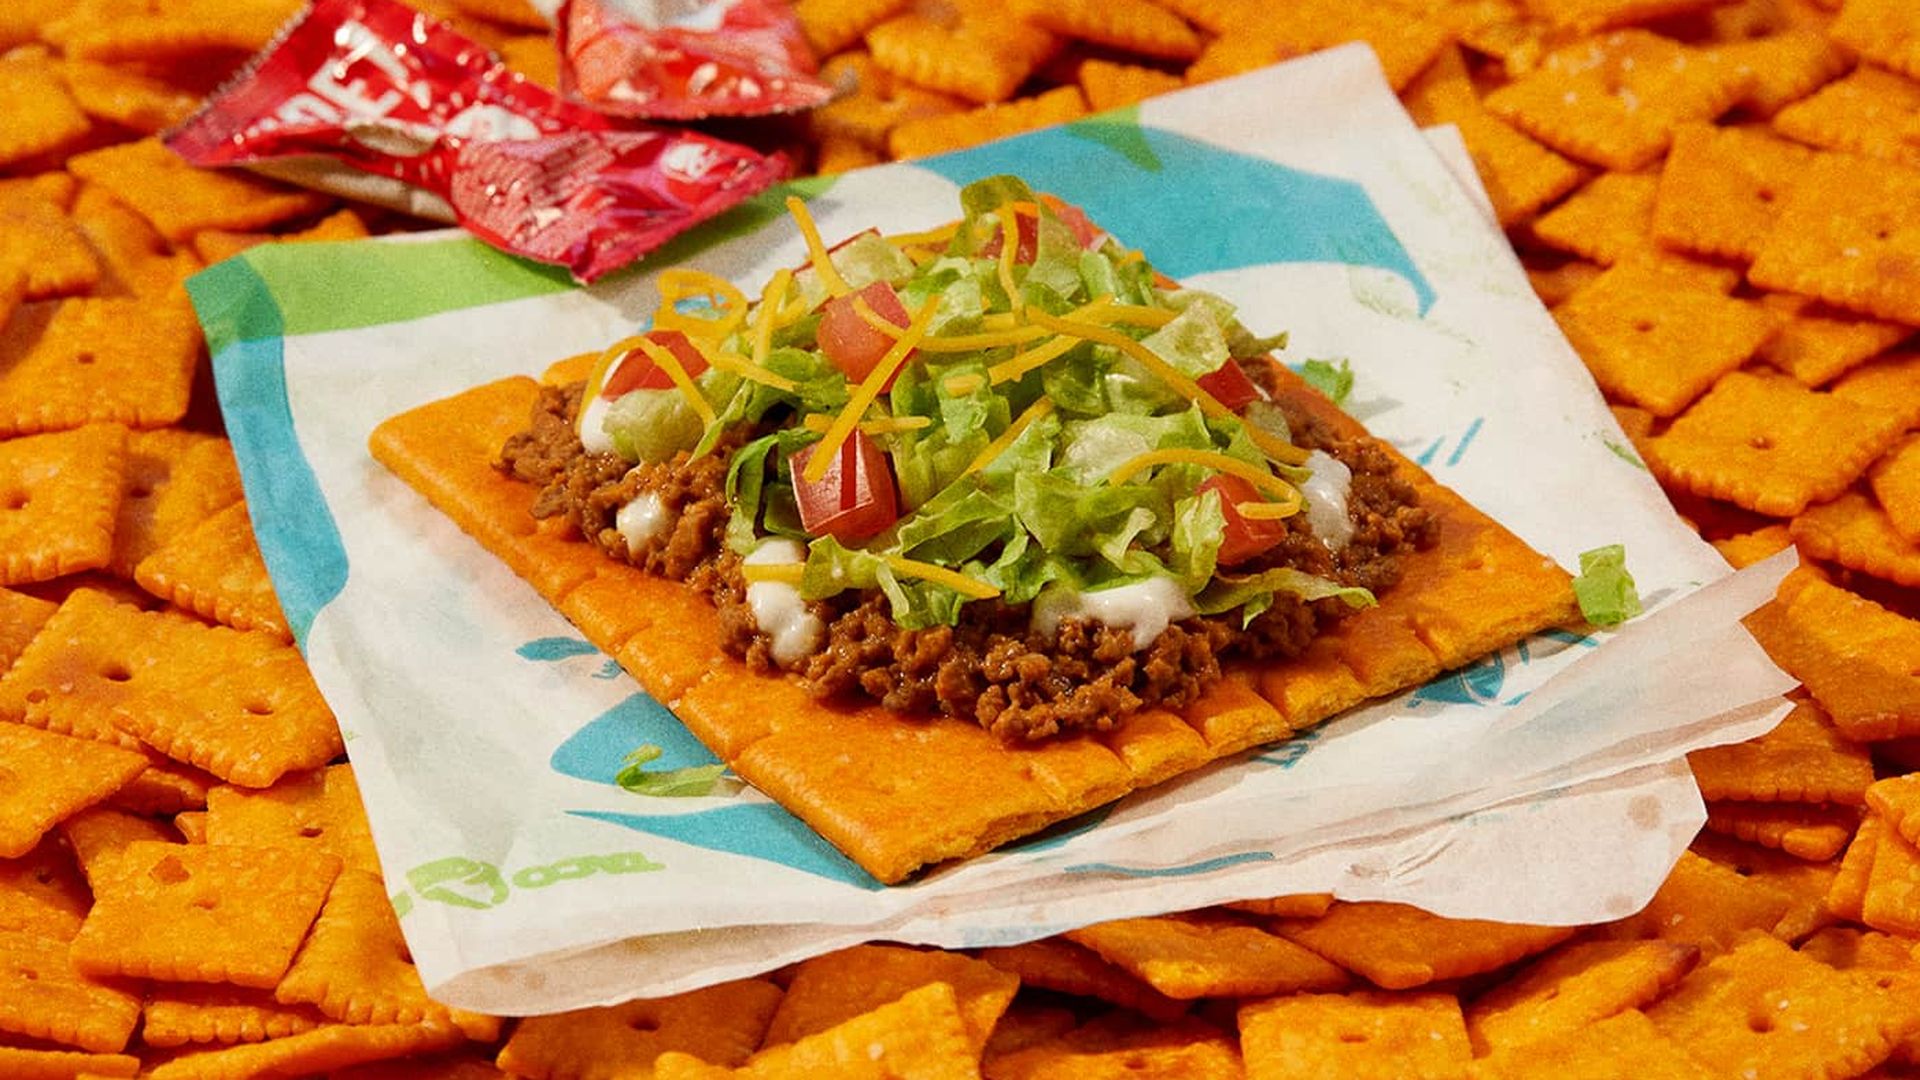 The Taco Bell Big Cheez-It Tostada.